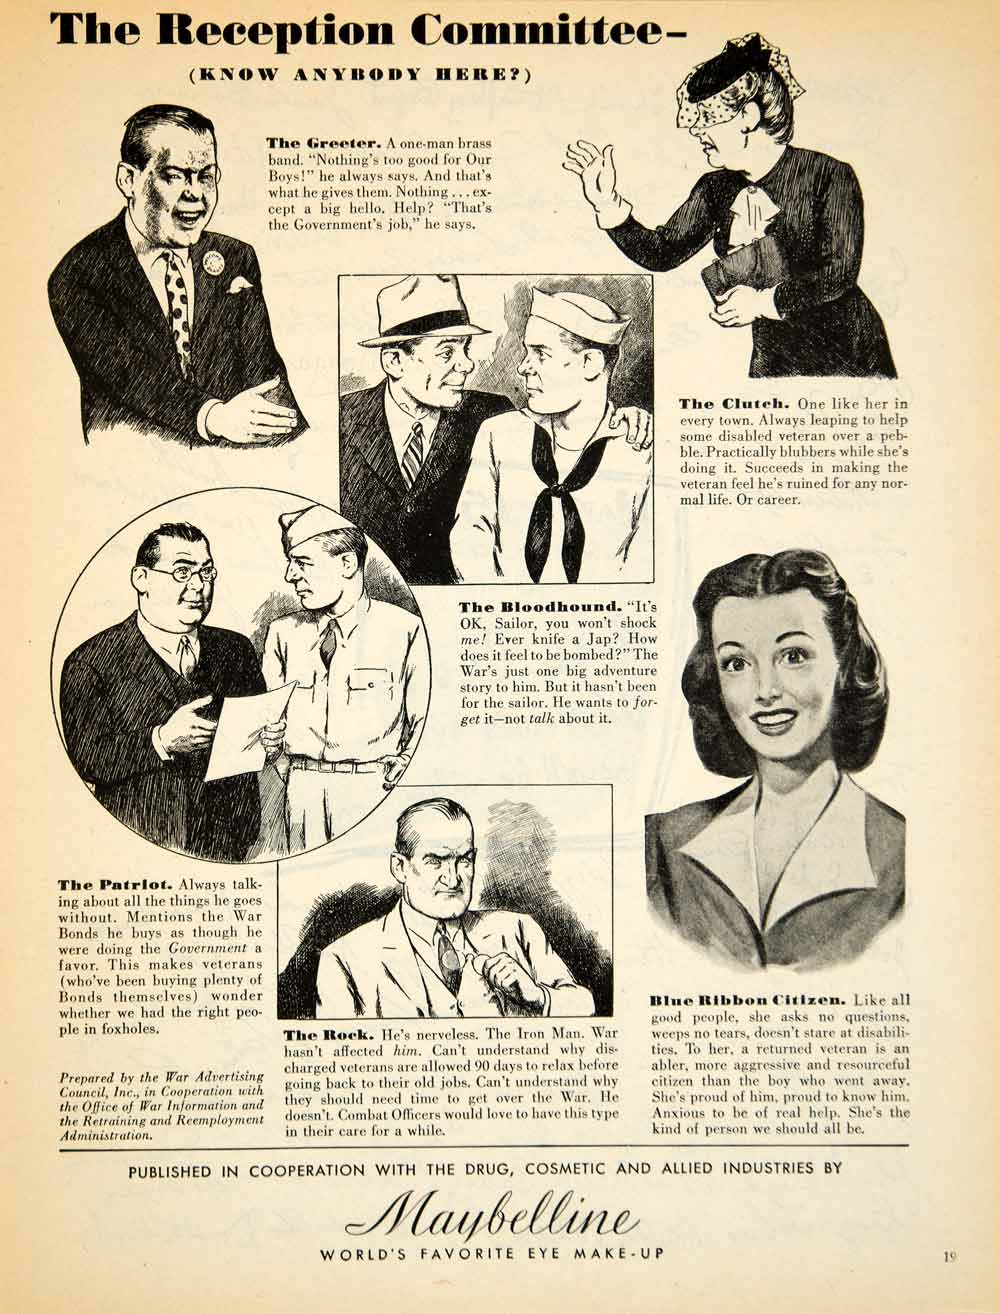 1945 Ad WWII War Advertising Council Returning Vets Veterans Wartime Home YMS2